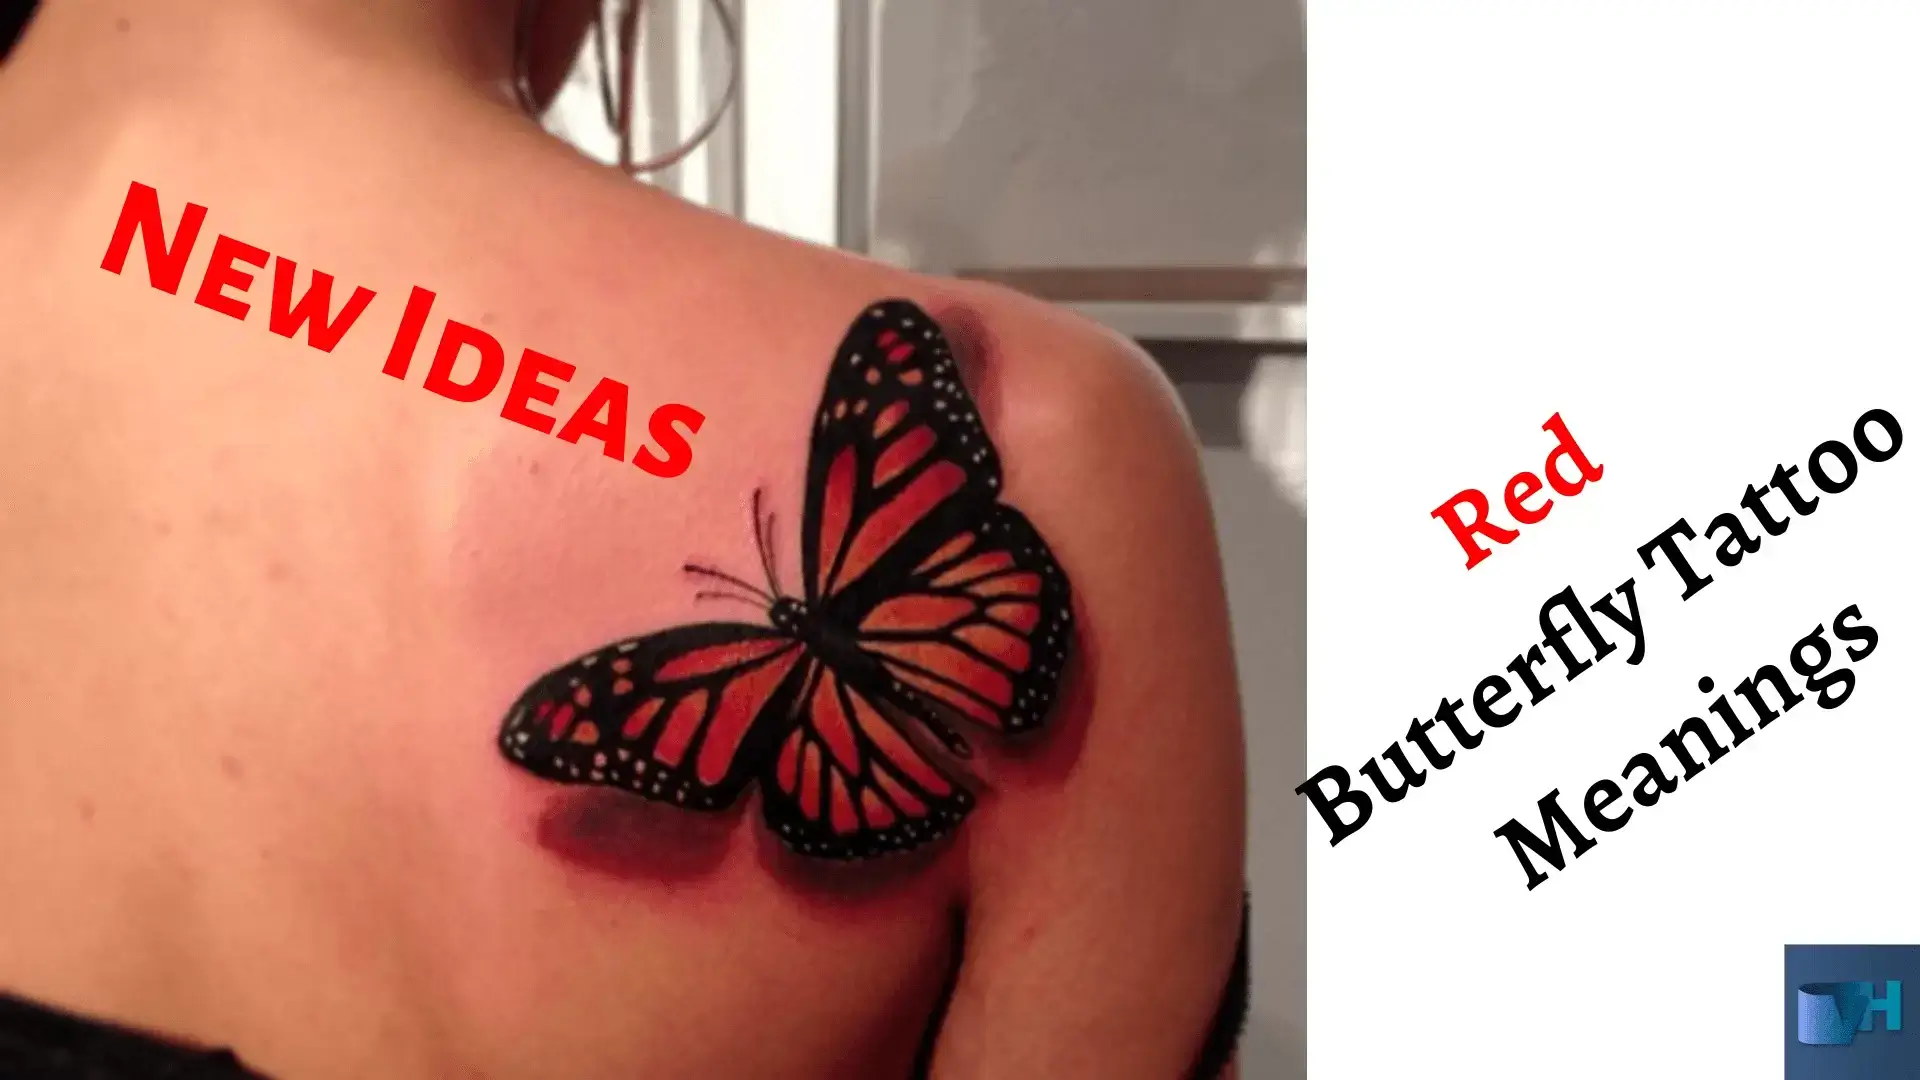 45 Stunning and Unique Butterfly Tattoos With Meaning